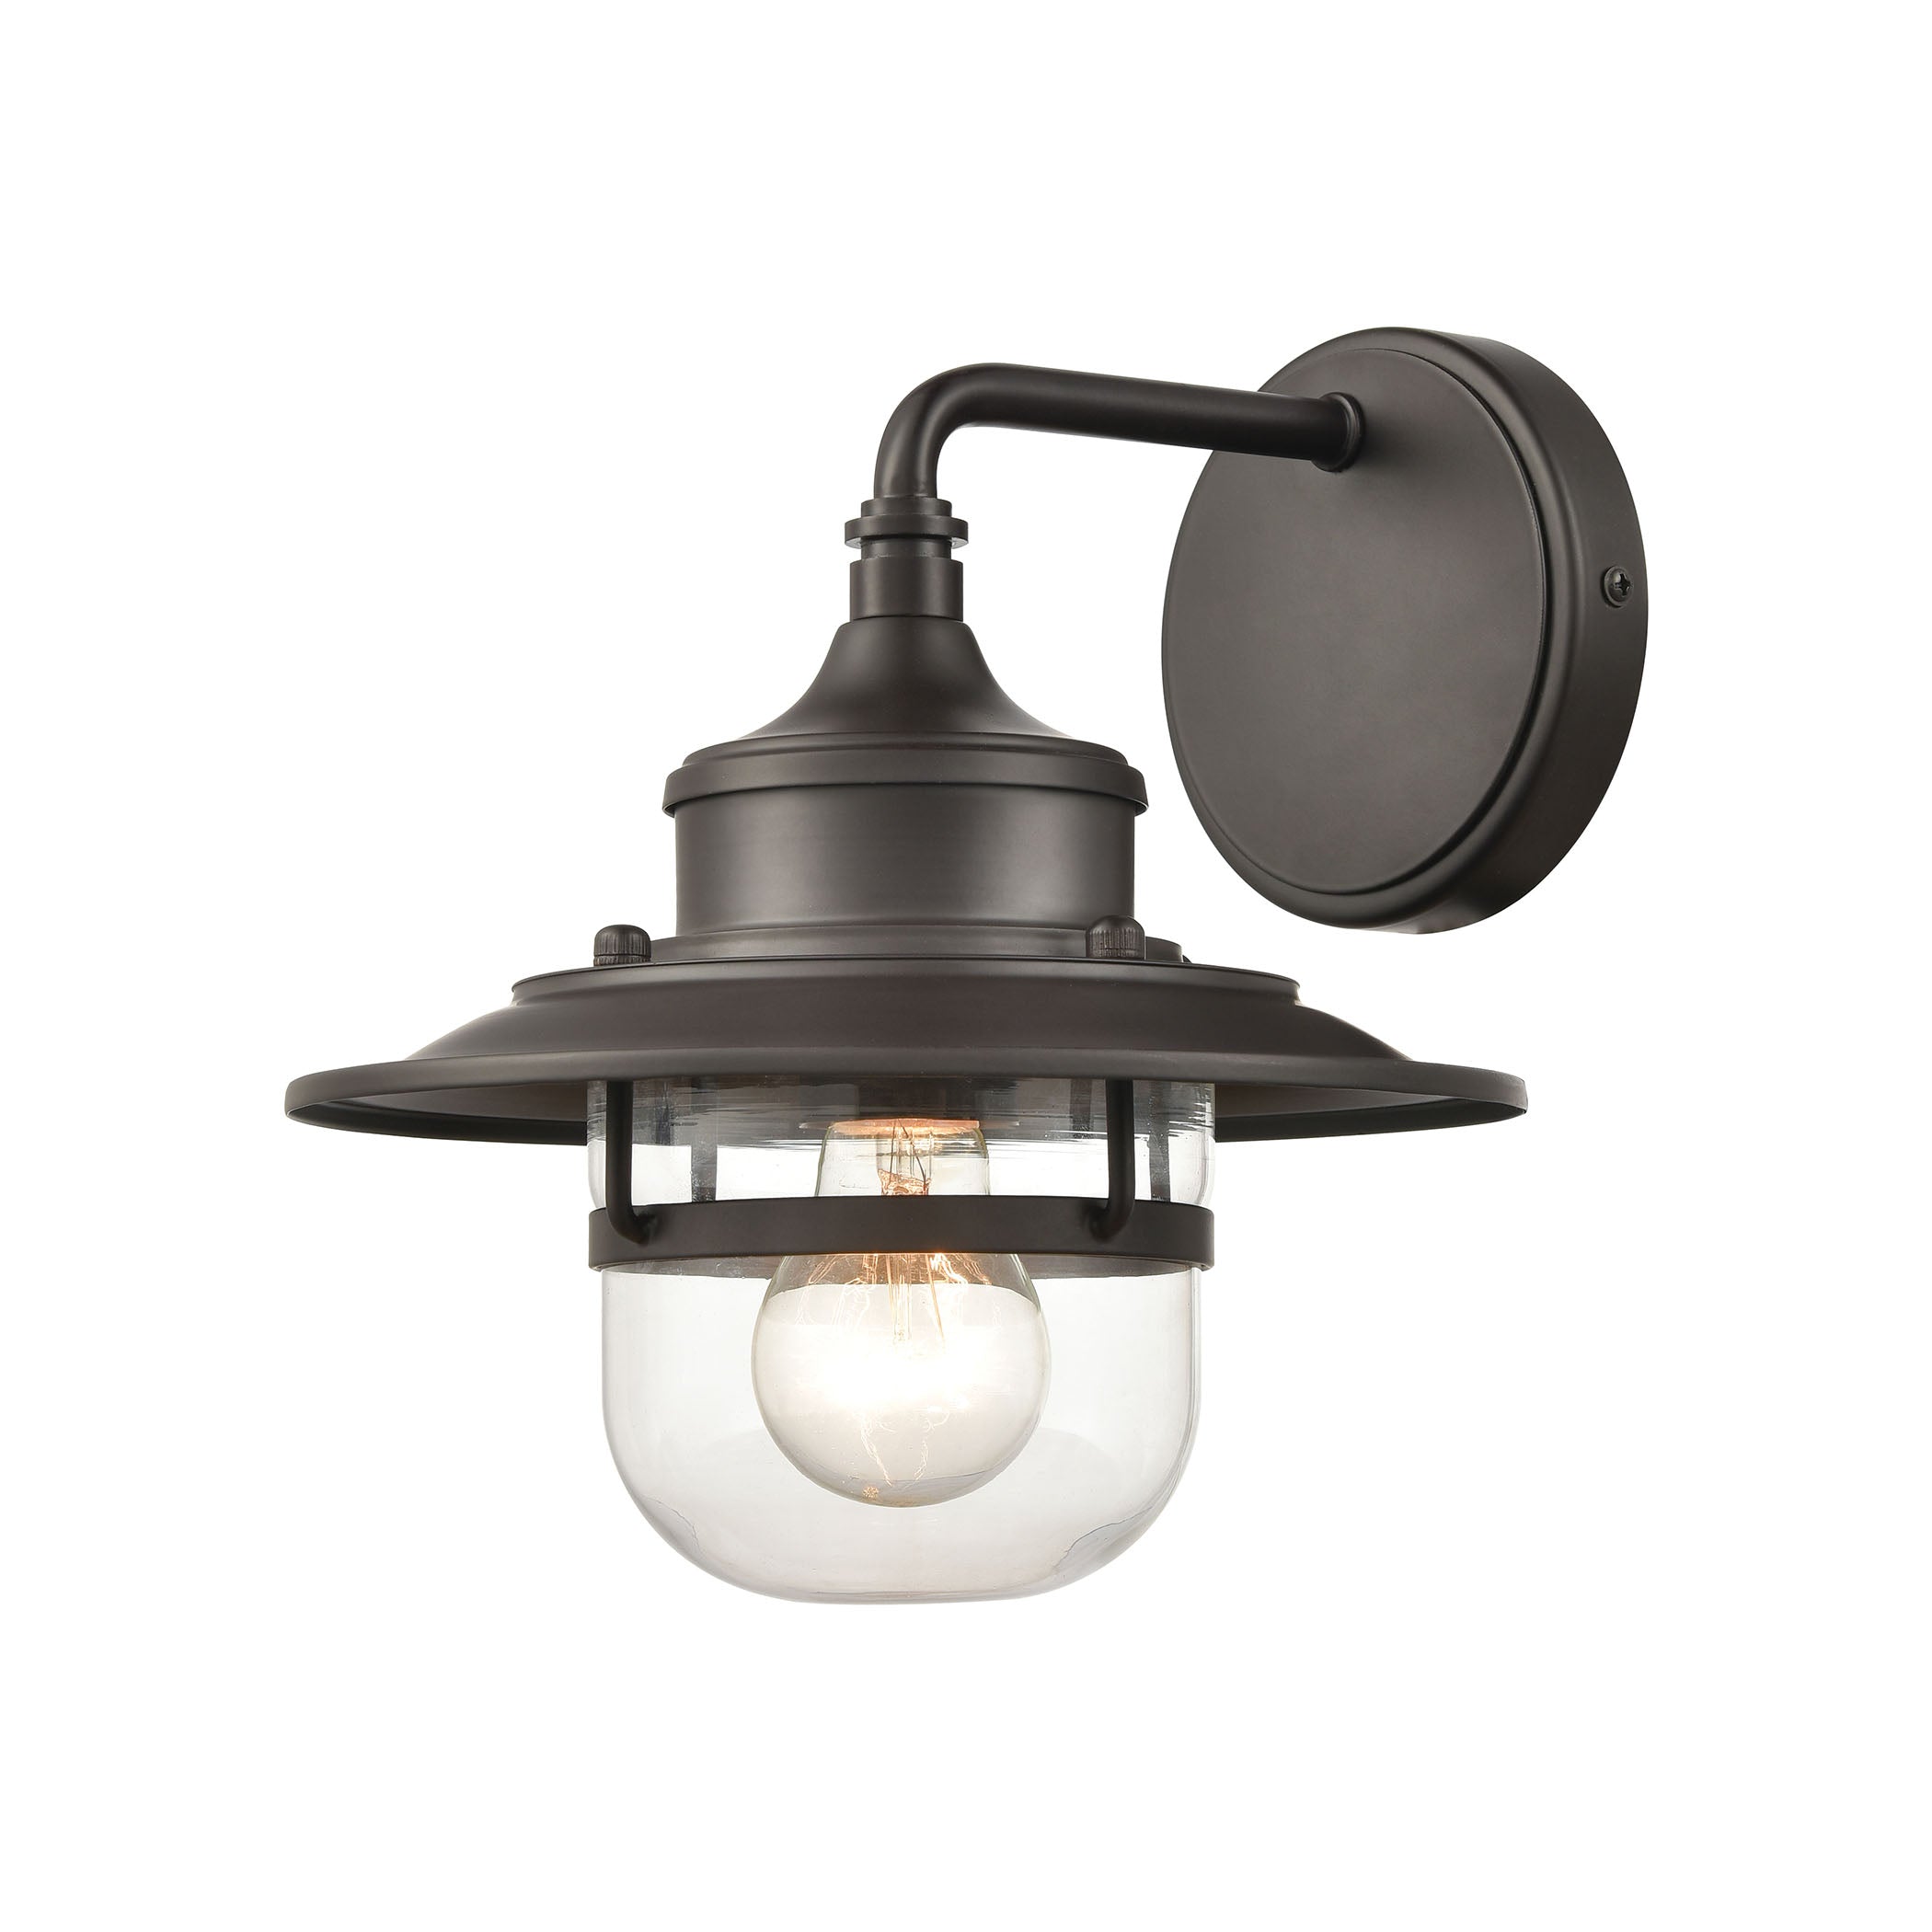 ELK Lighting 46070/1 Renninger 1-Light Outdoor Sconce in Oil Rubbed Bronze with Clear Glass